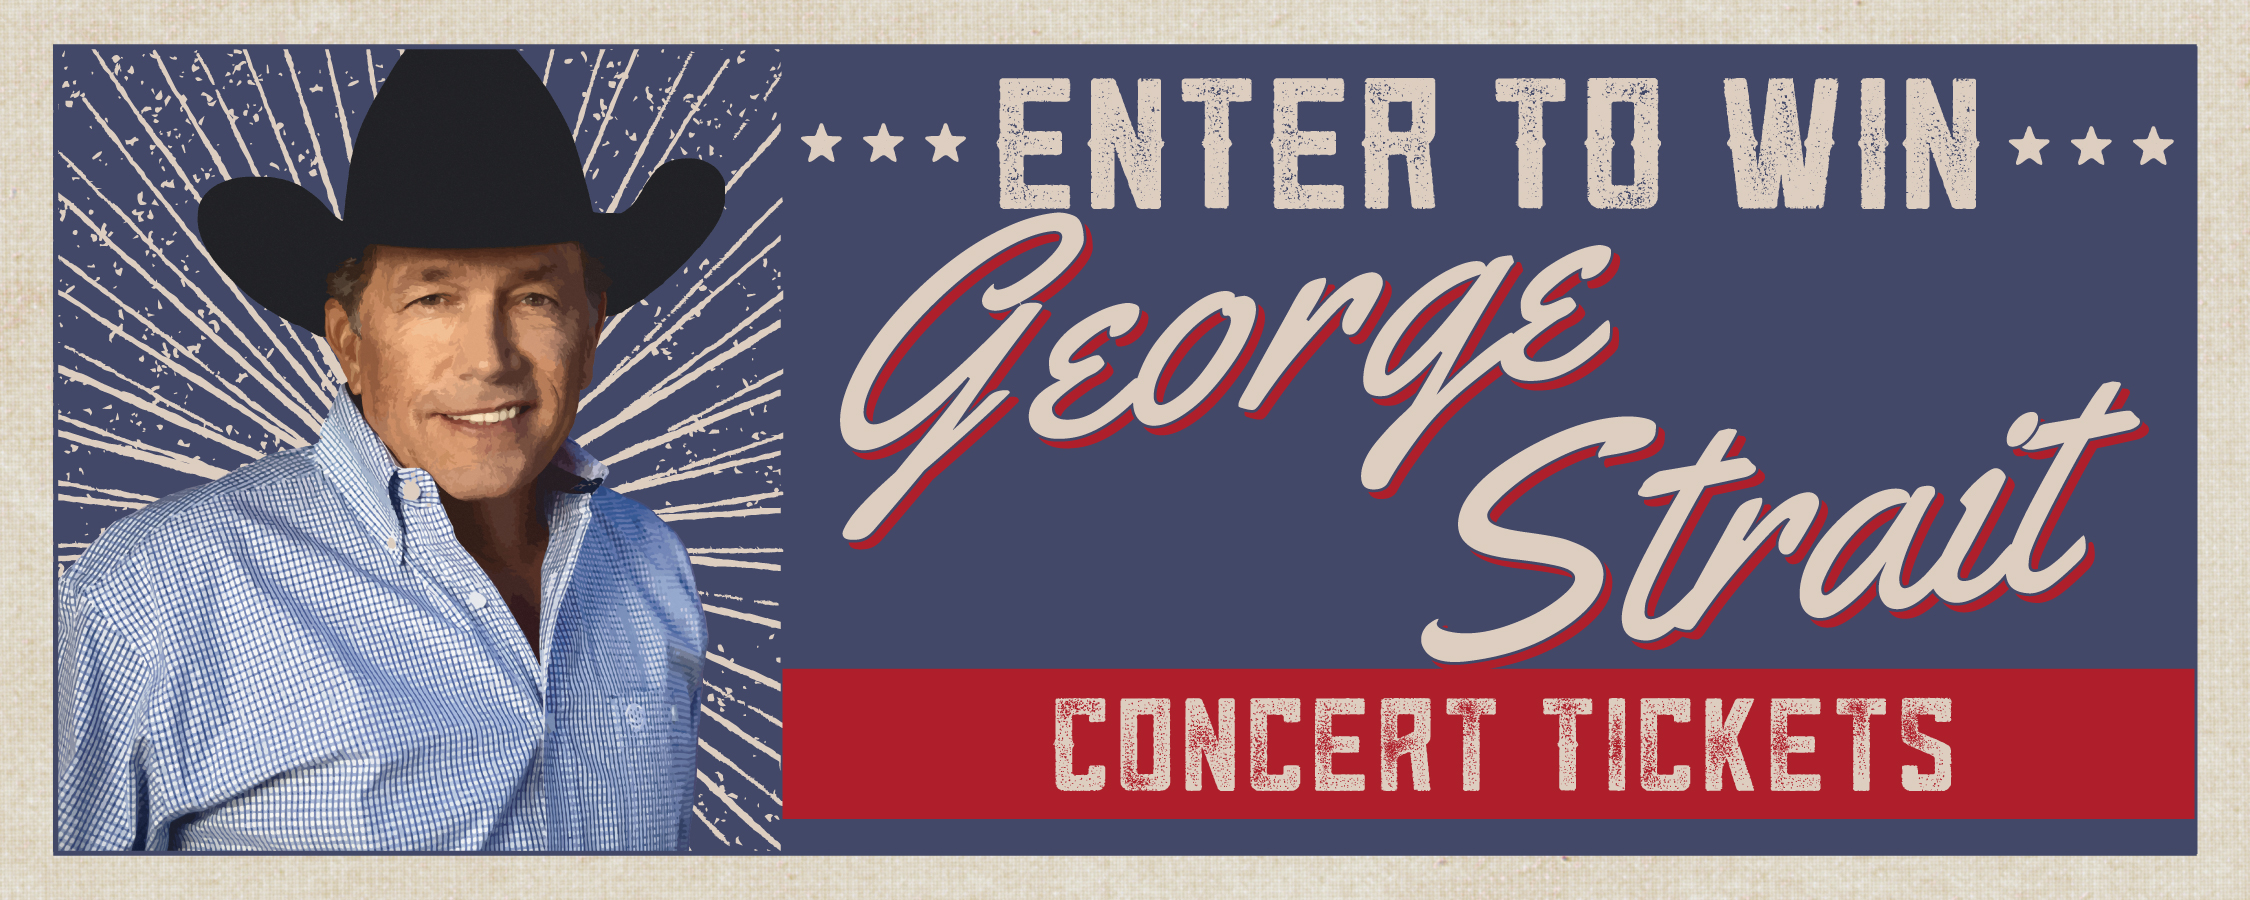 George Strait Ticket Giveaway Rules